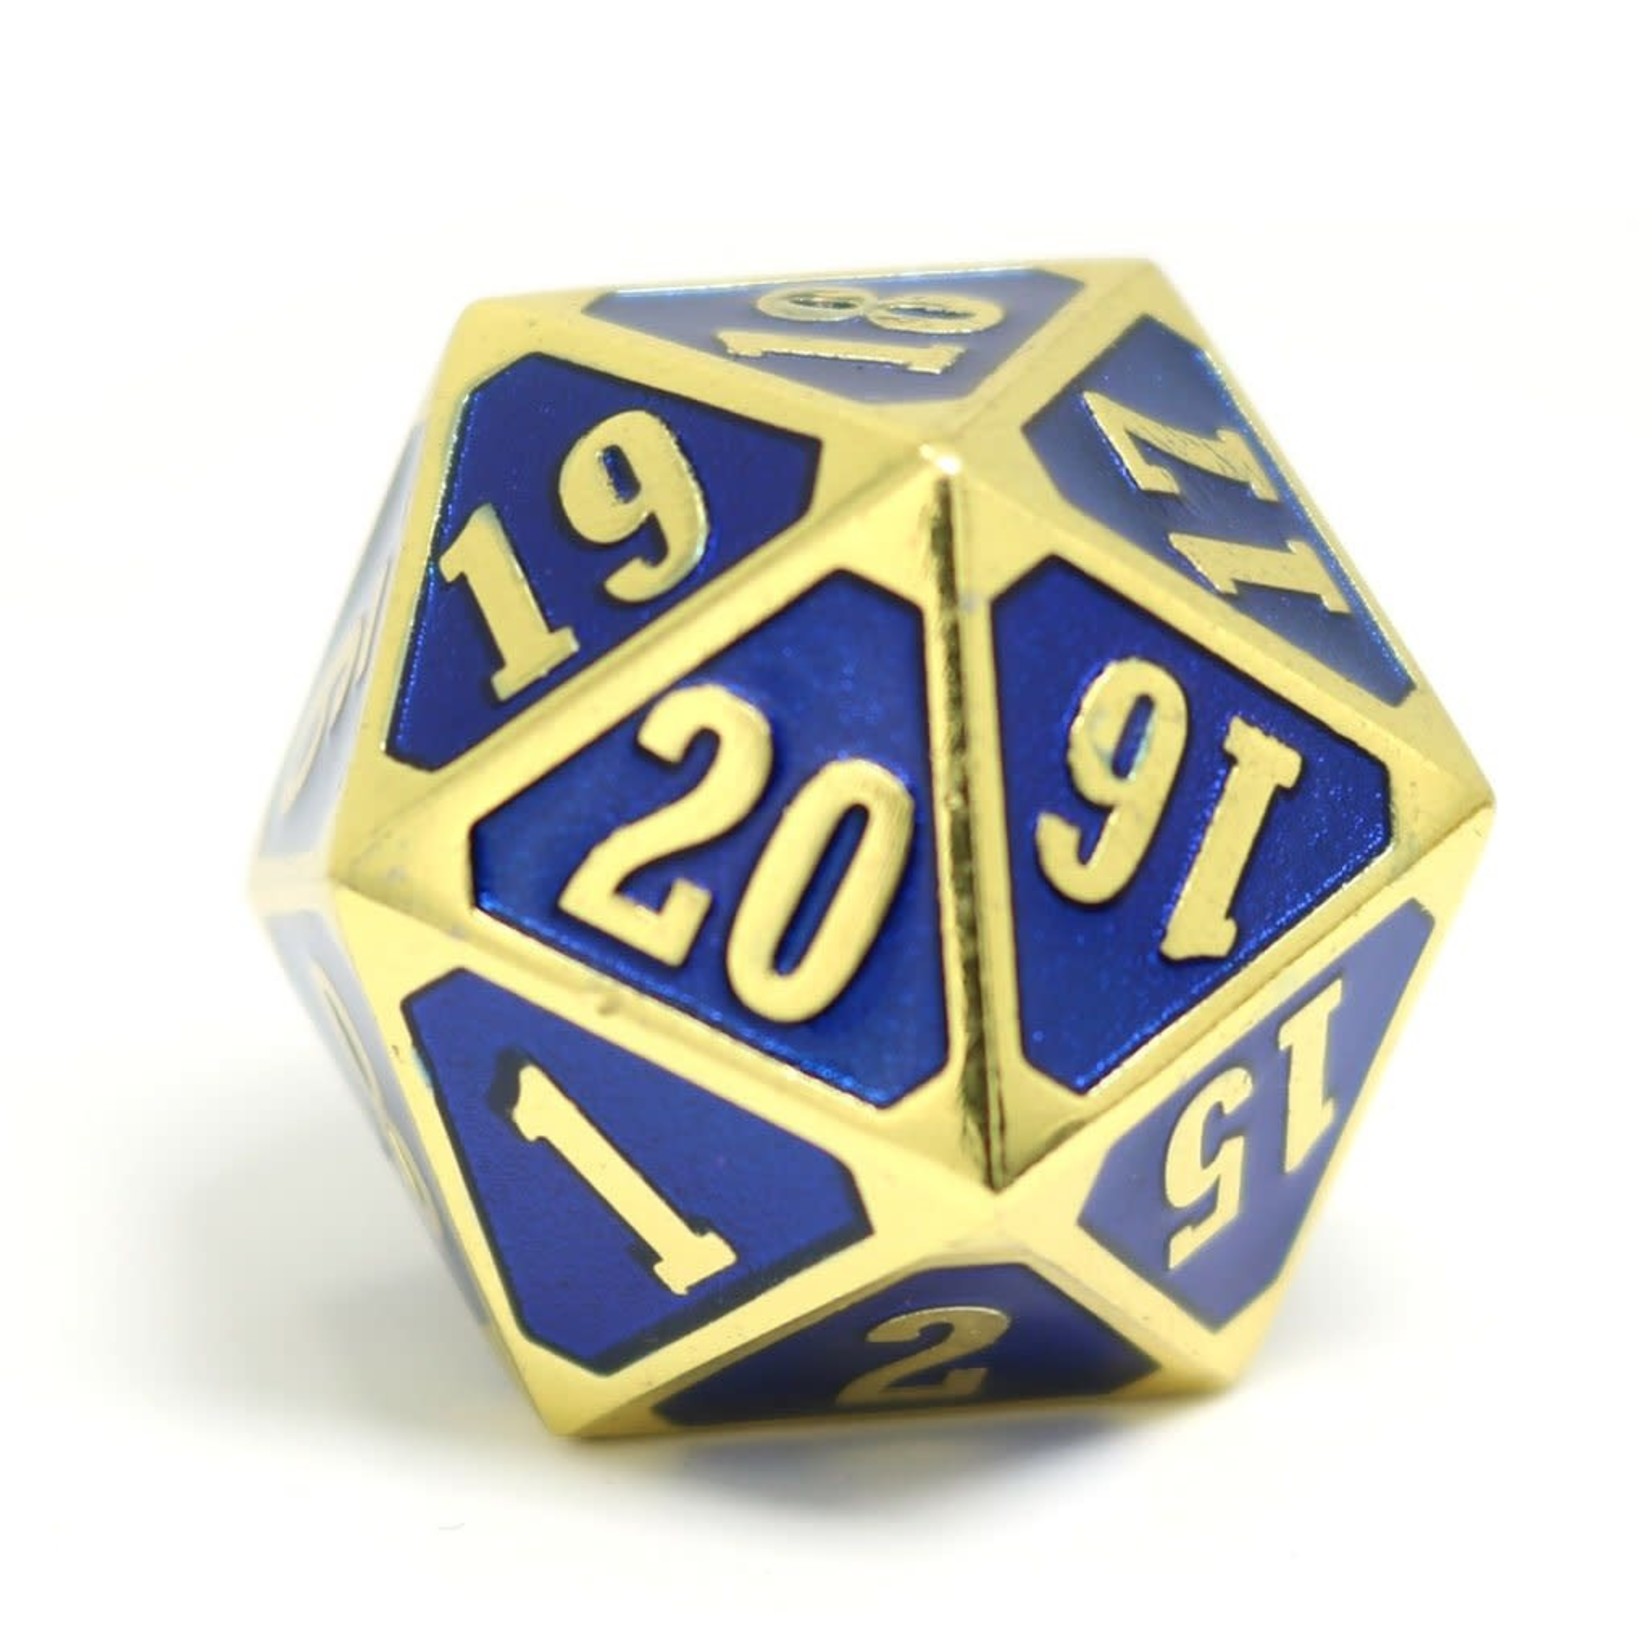 Die Hard Dice Roll Down D20 Shiny Gold Sapphire